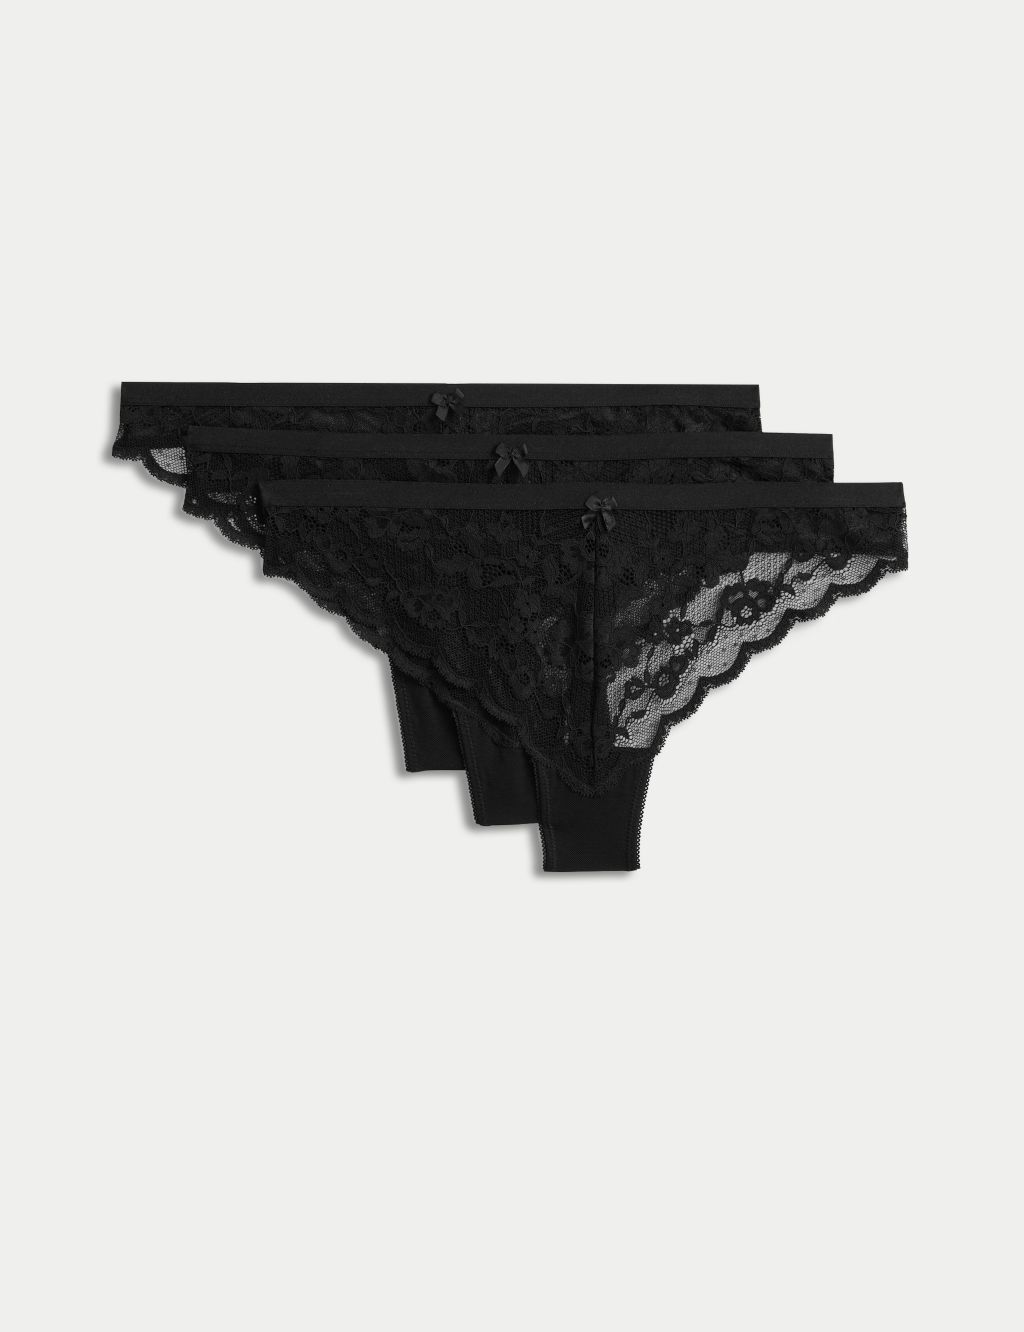 New Look 3 pack lace thong in black